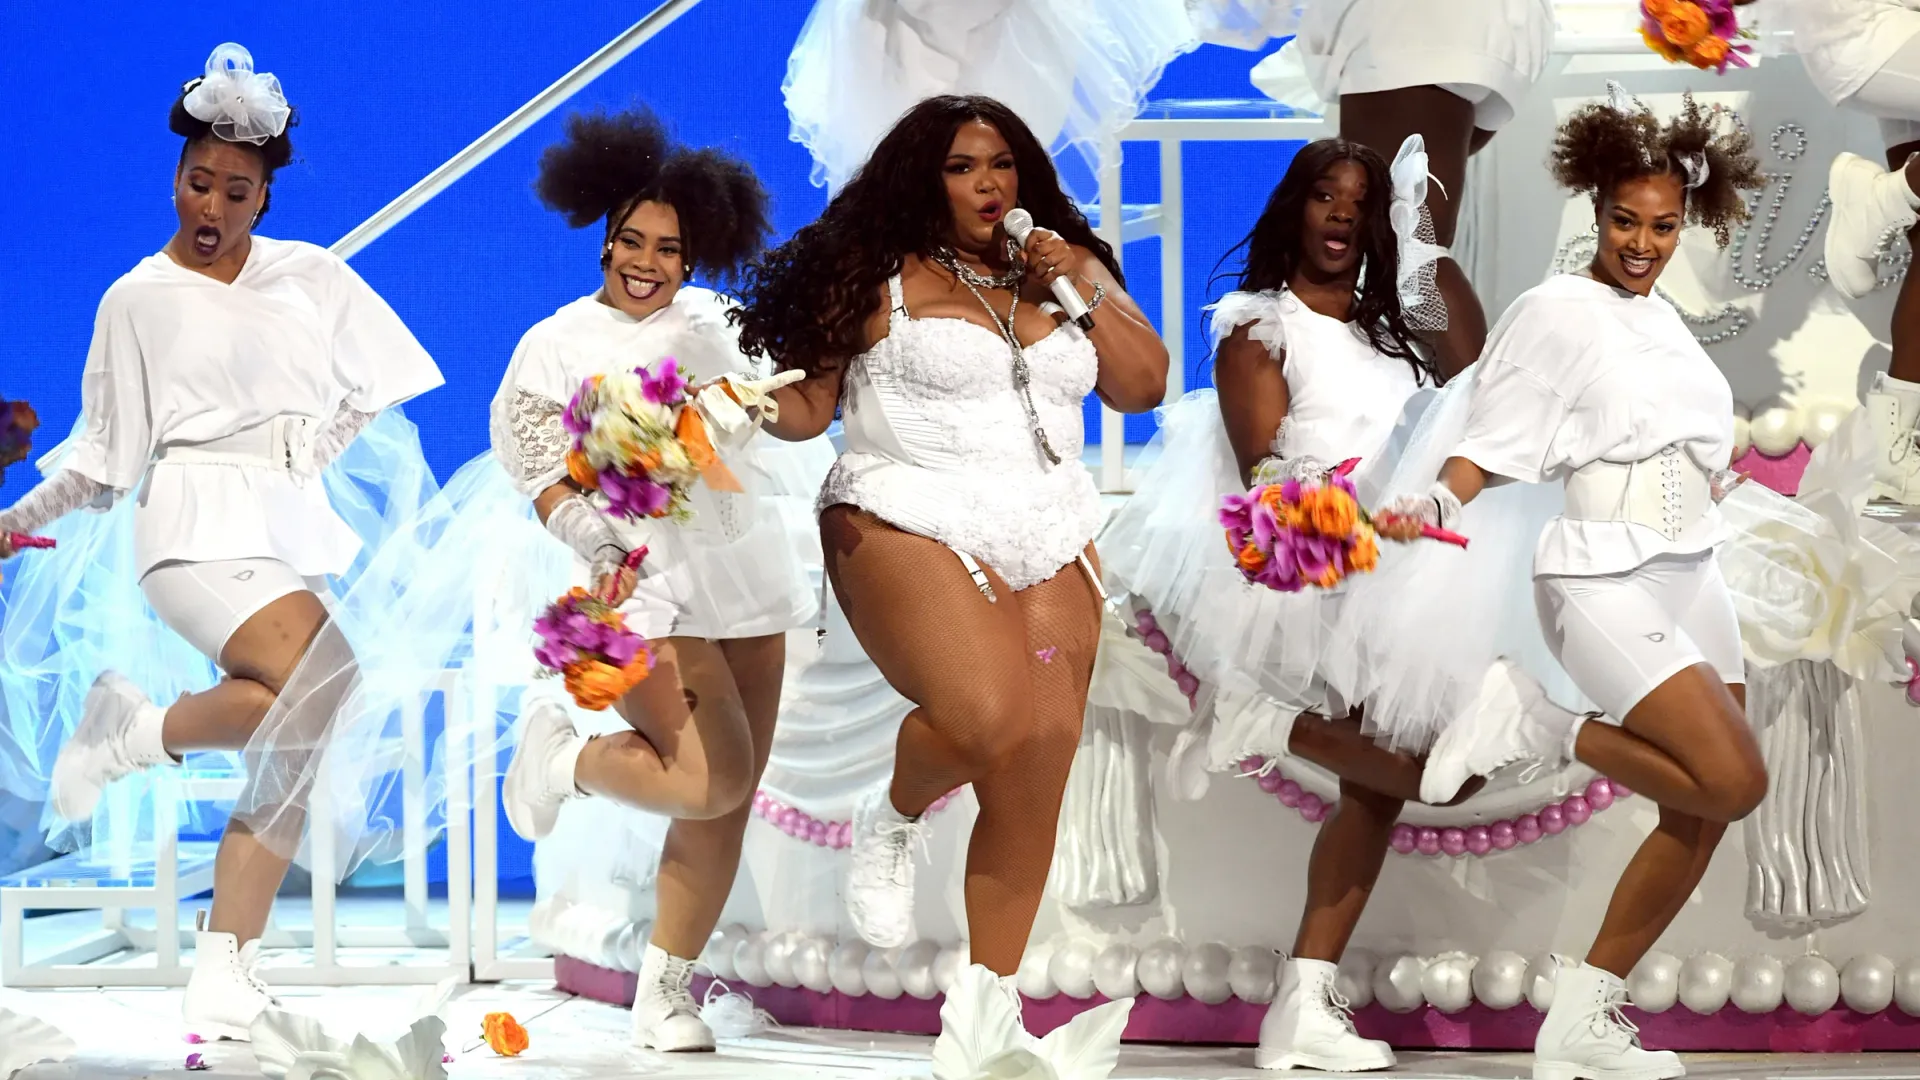 Lizzo was accused of fatphobia against her dancers